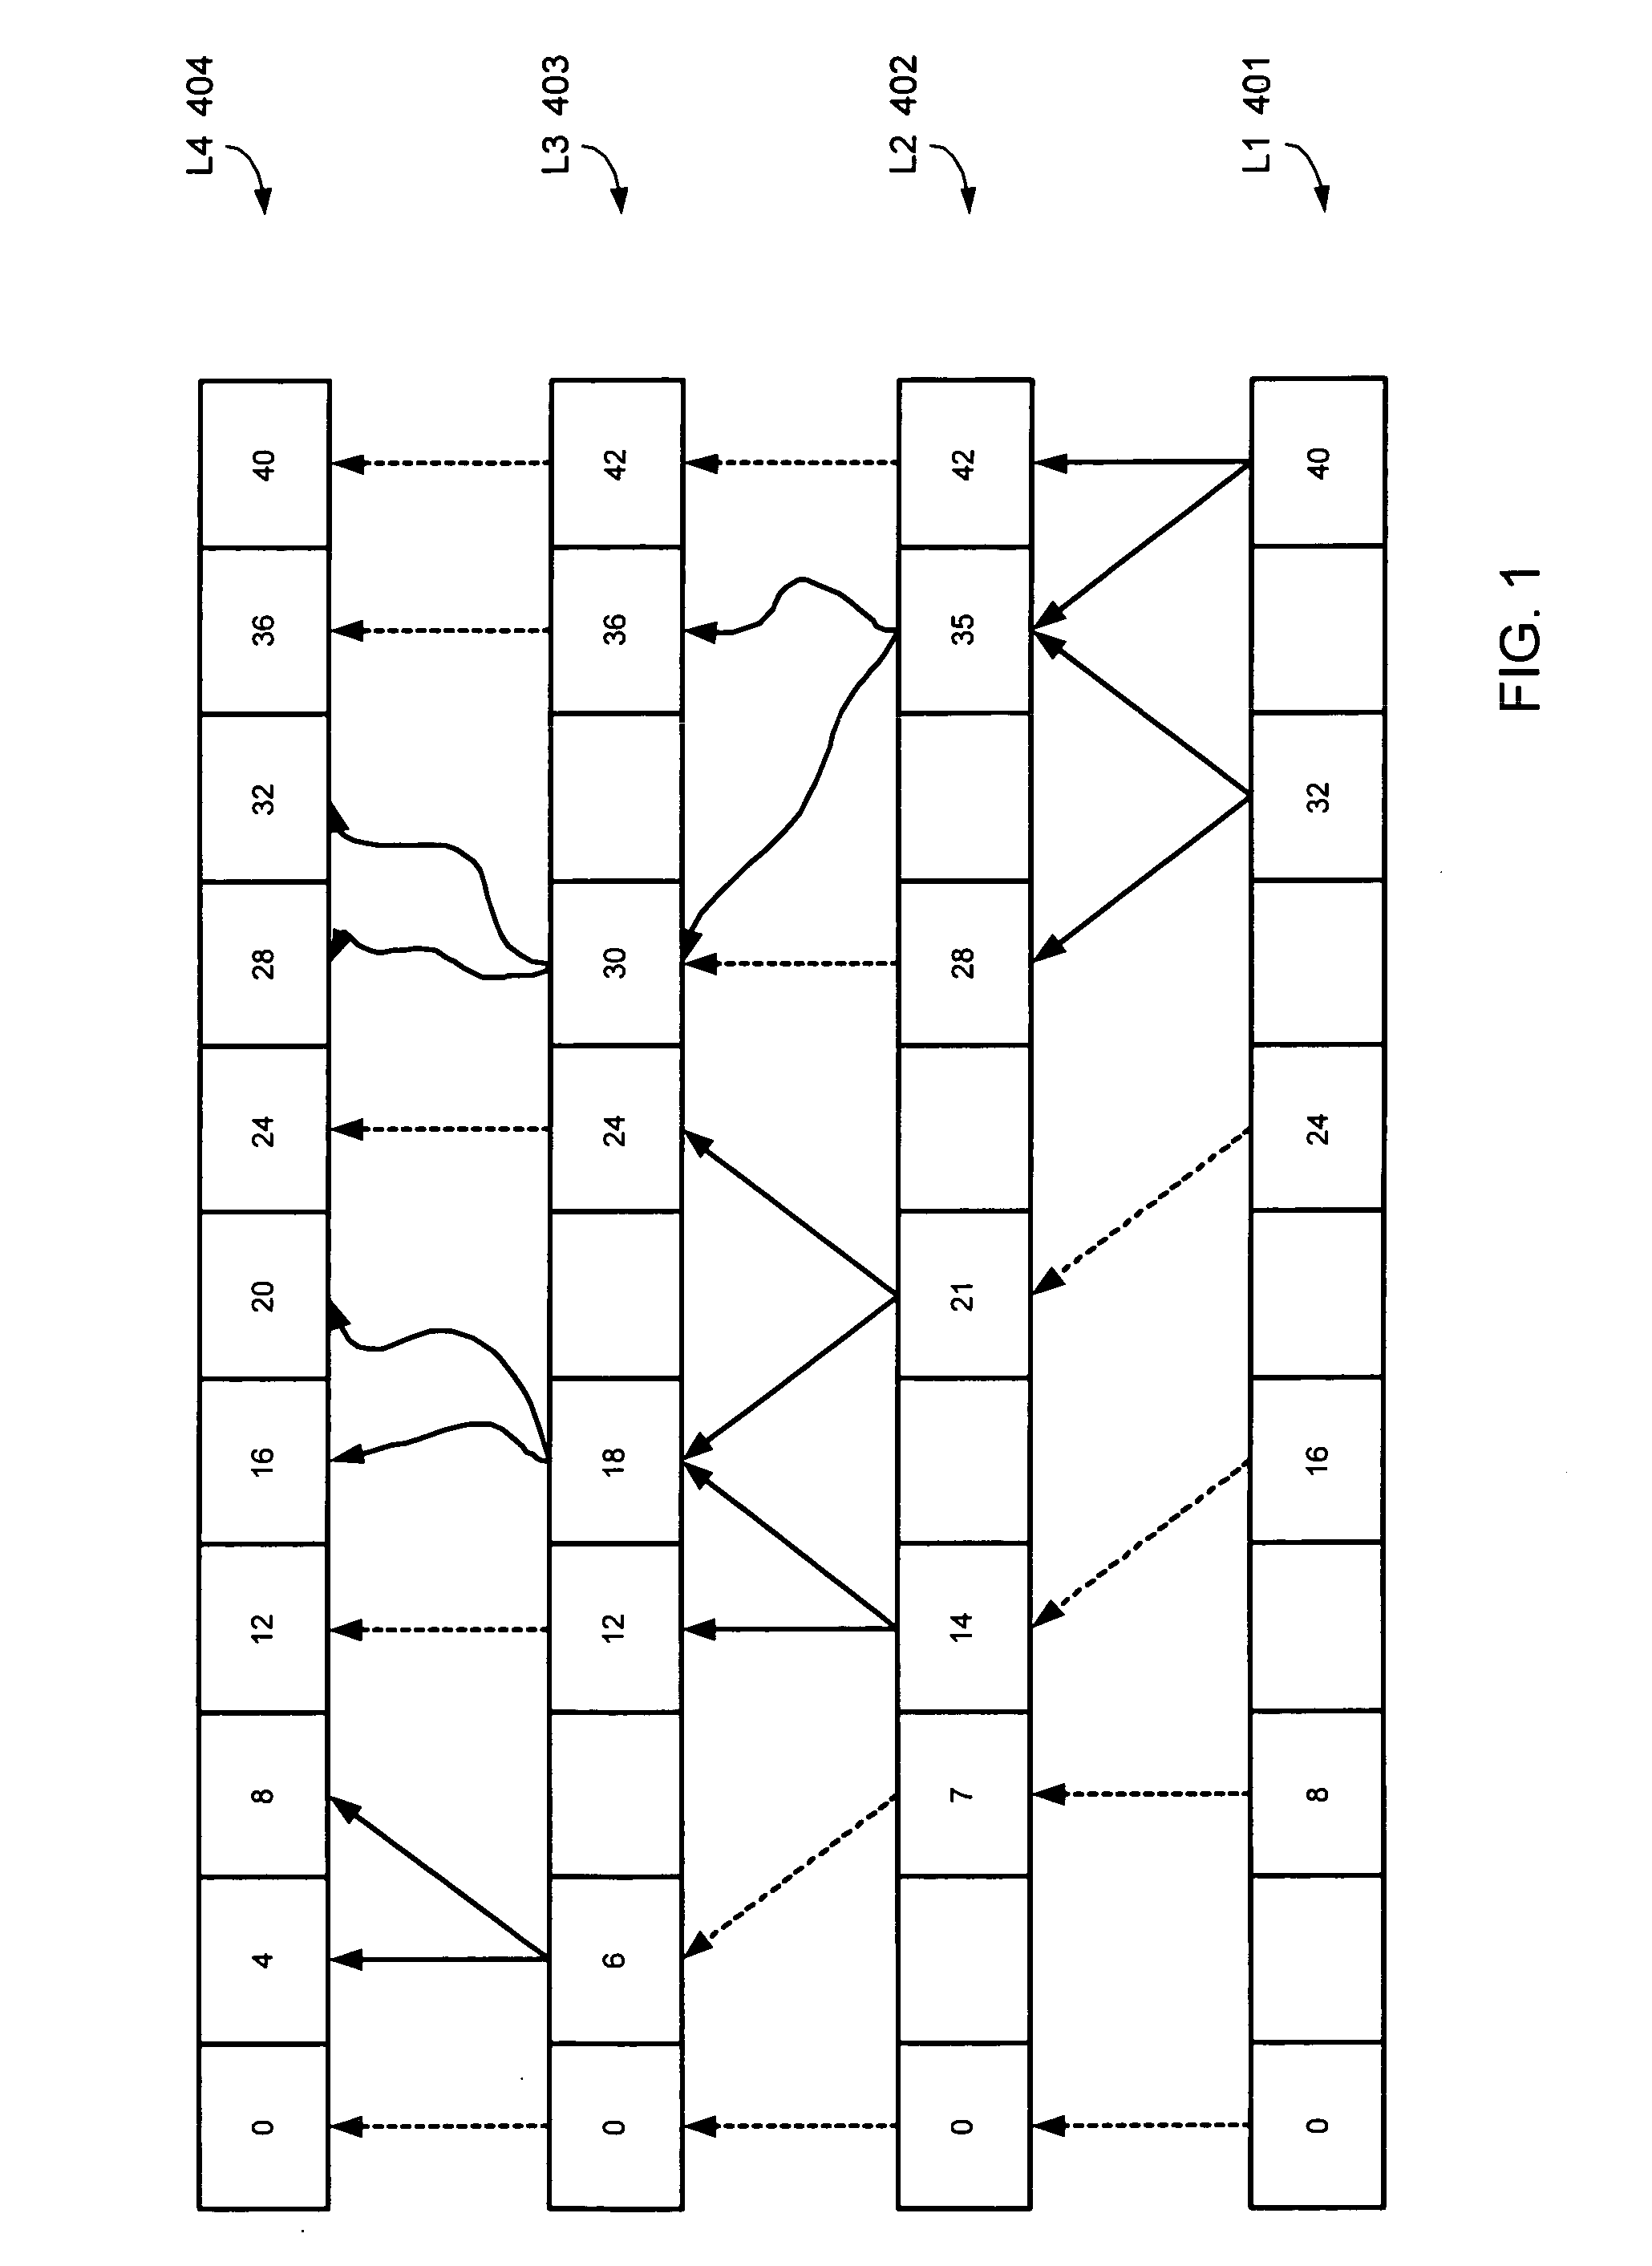 Method and system for scalable representation, storage, transmission and reconstruction of media streams